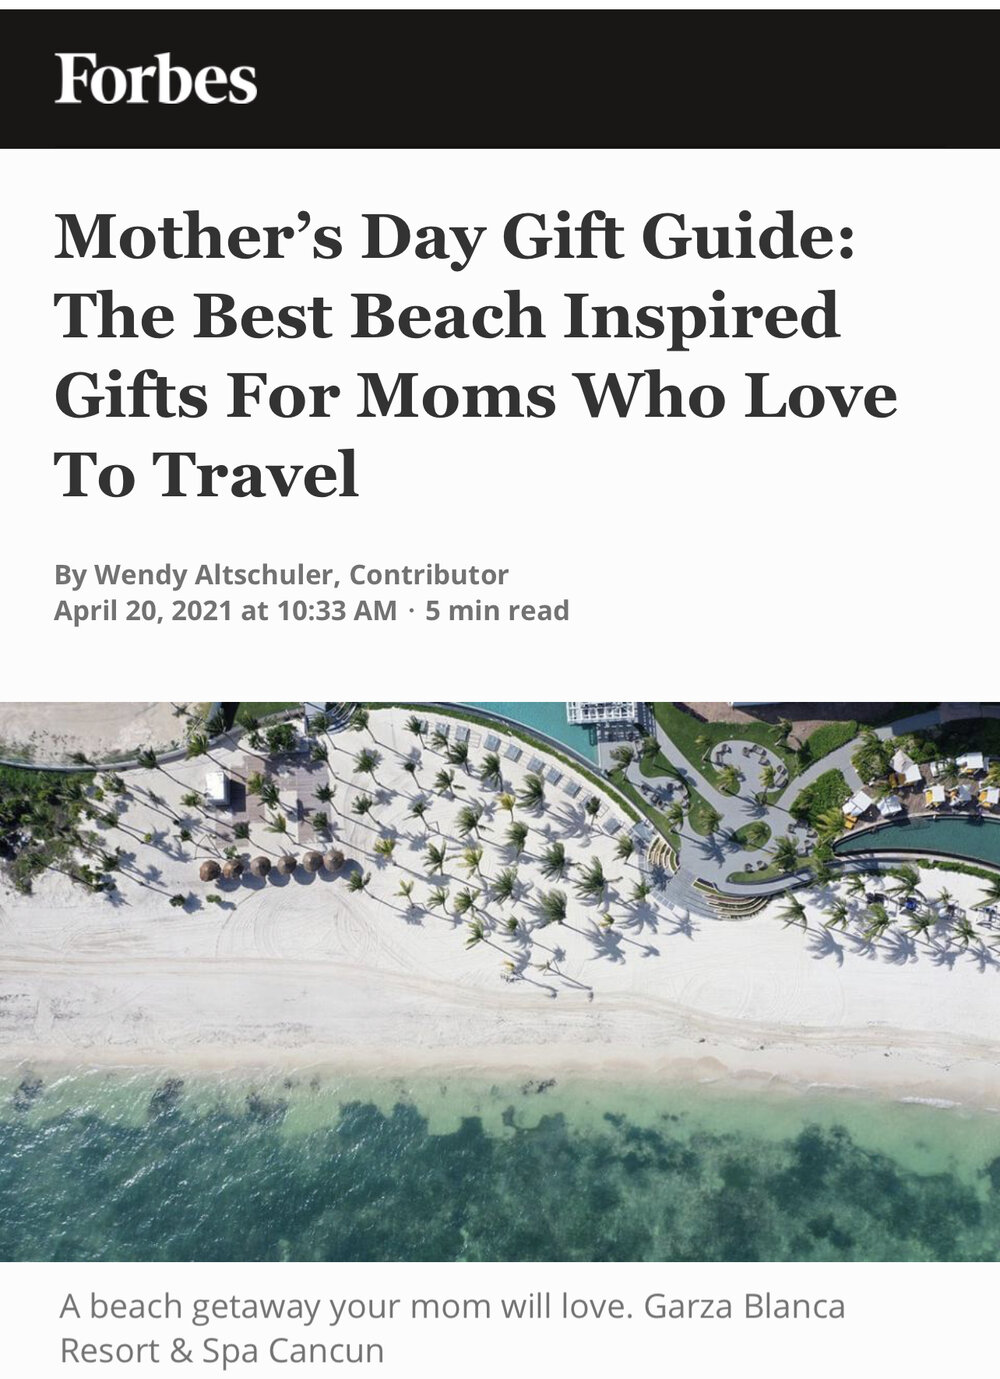 Mother’s Day Gift Guide: The Best Beach Inspired Gifts For Moms Who Love To Travel